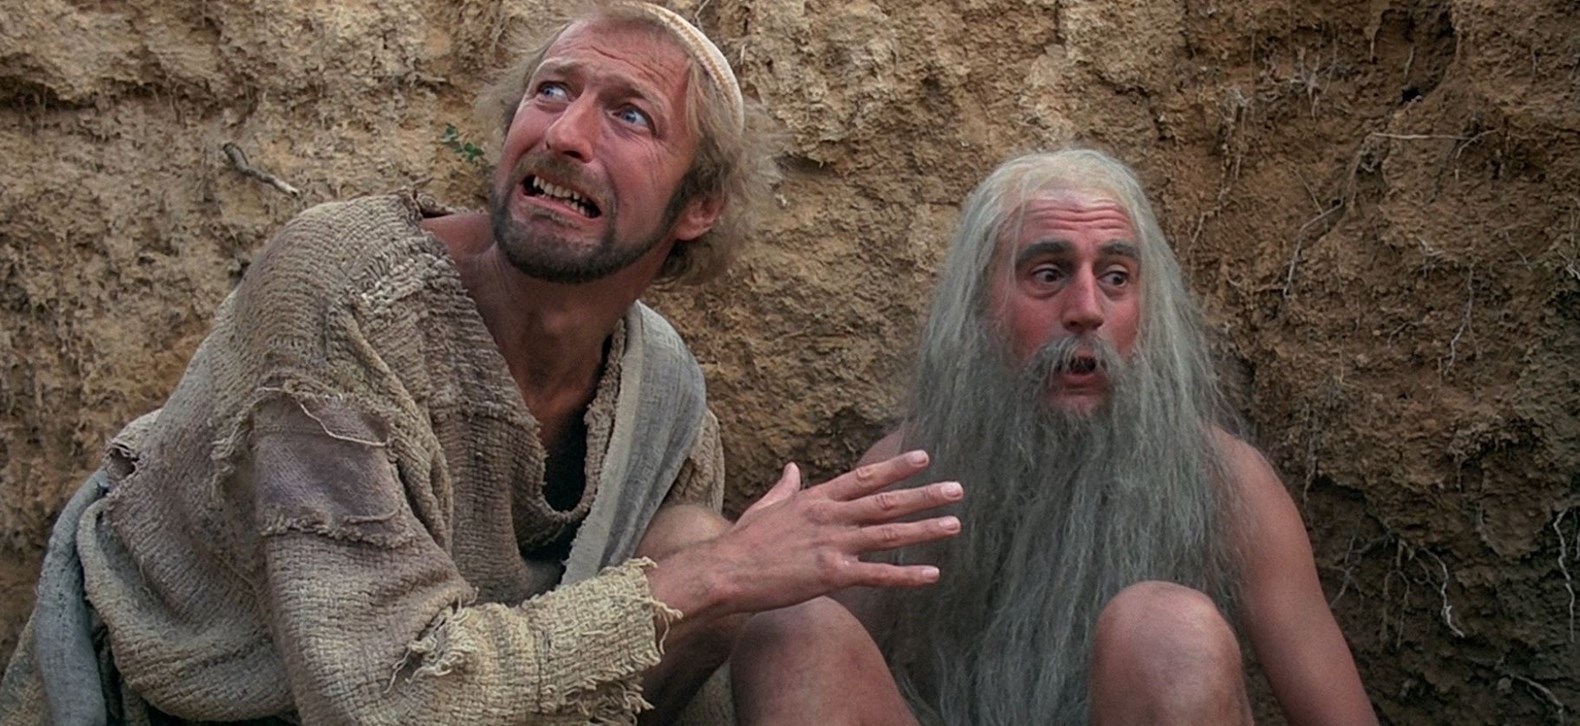 Image for Monty Python's Life of Brian